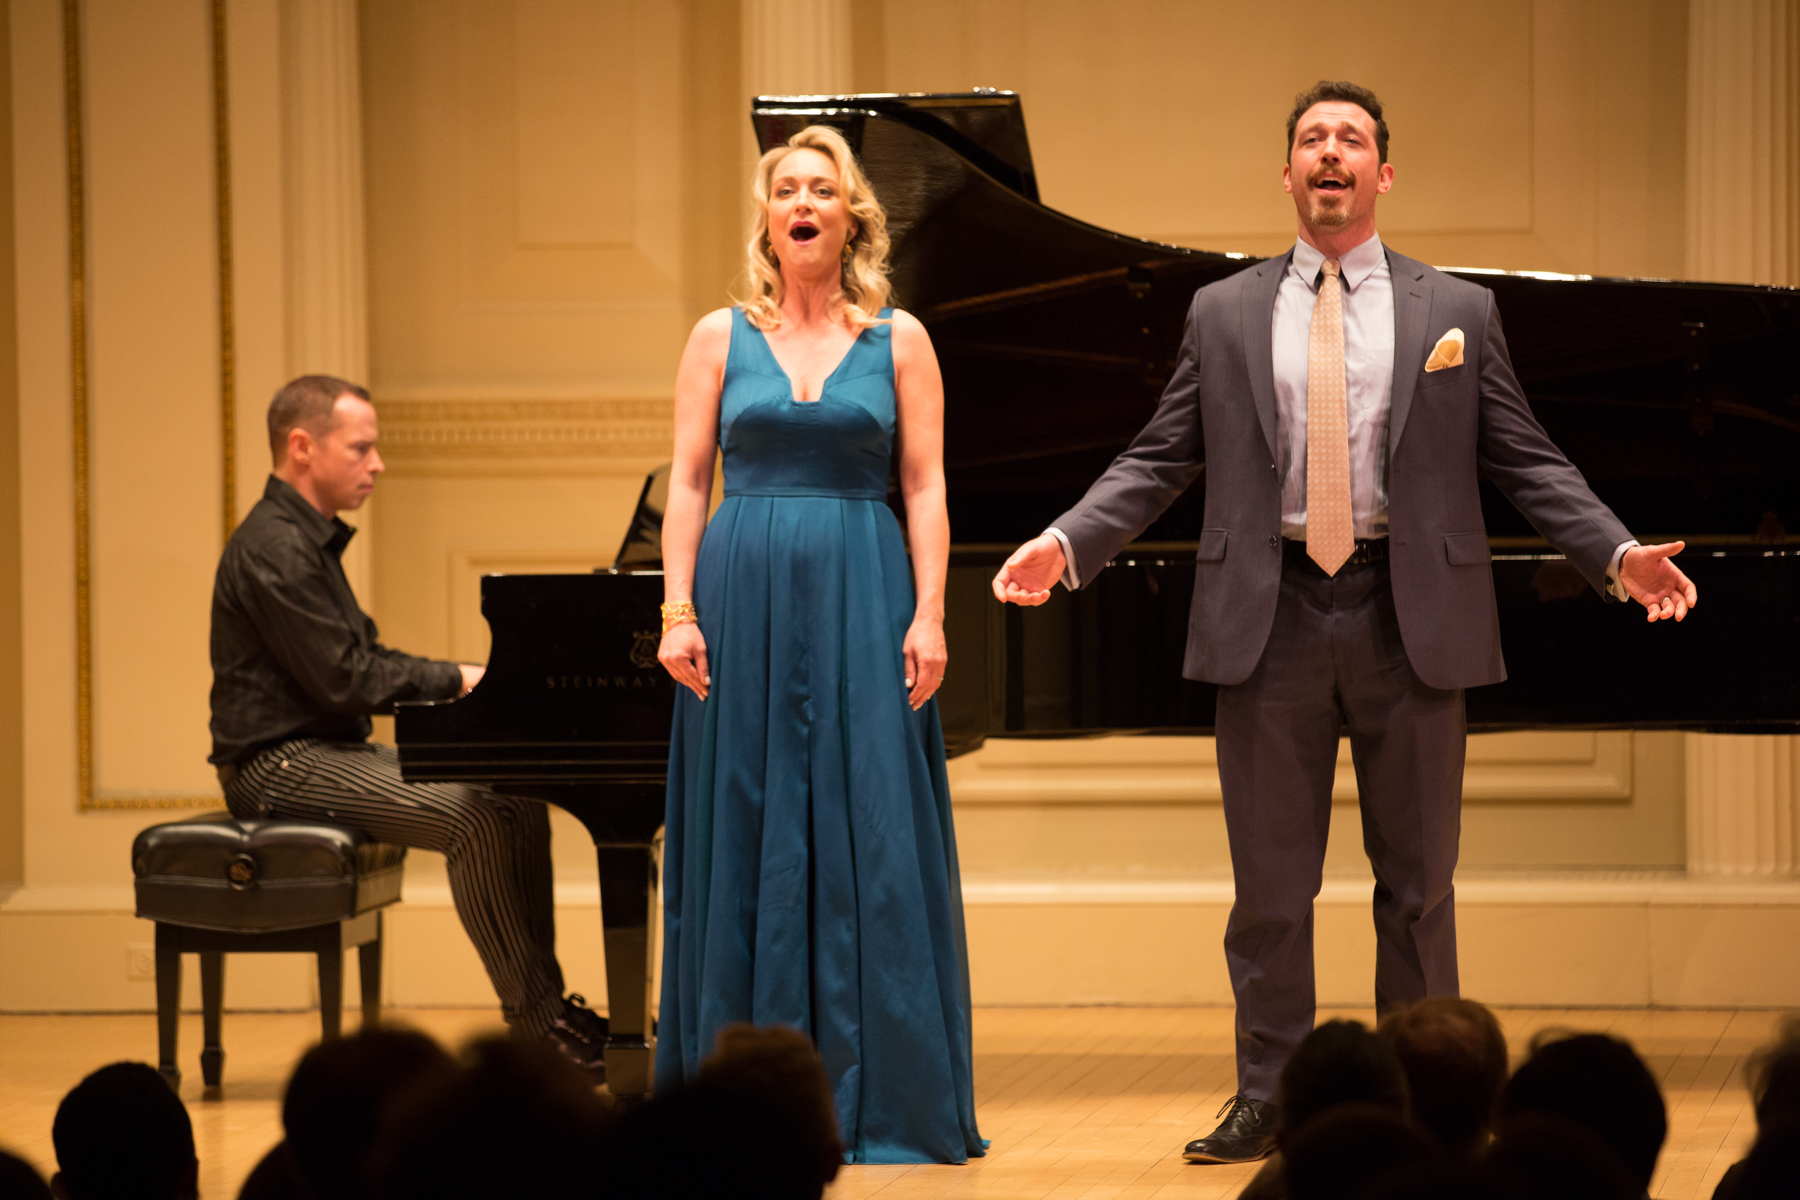 ame-2018-carnegie-hall-vocal-music-of-robert-patersonDG9A7868.jpg